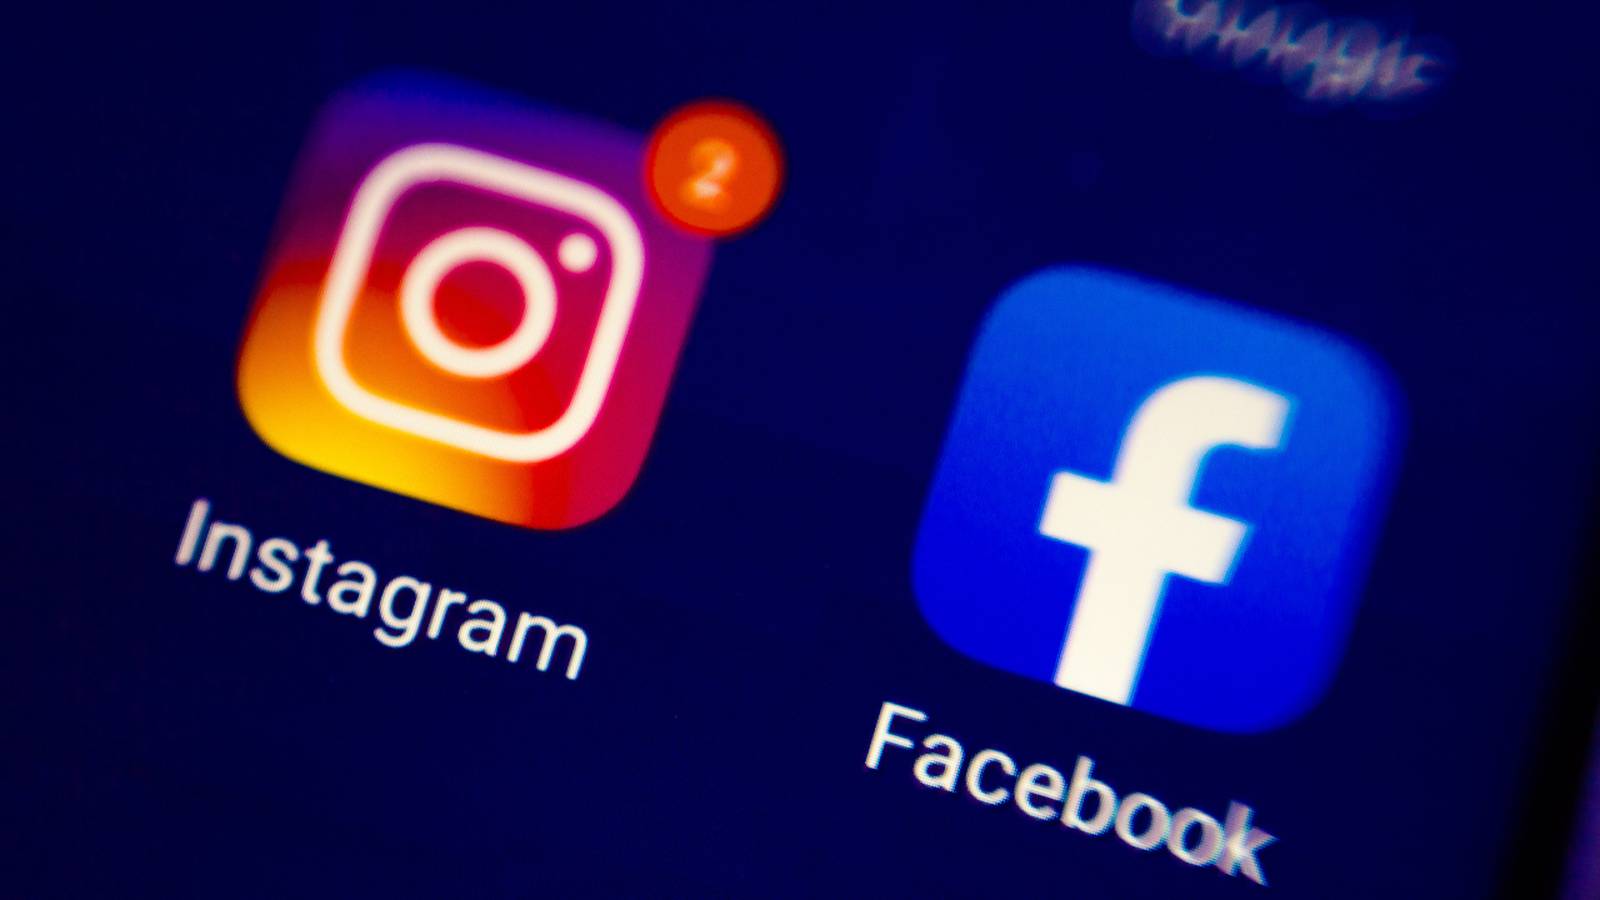 Did Facebook log you out on Tuesday? What happened to the Meta apps? WDBO